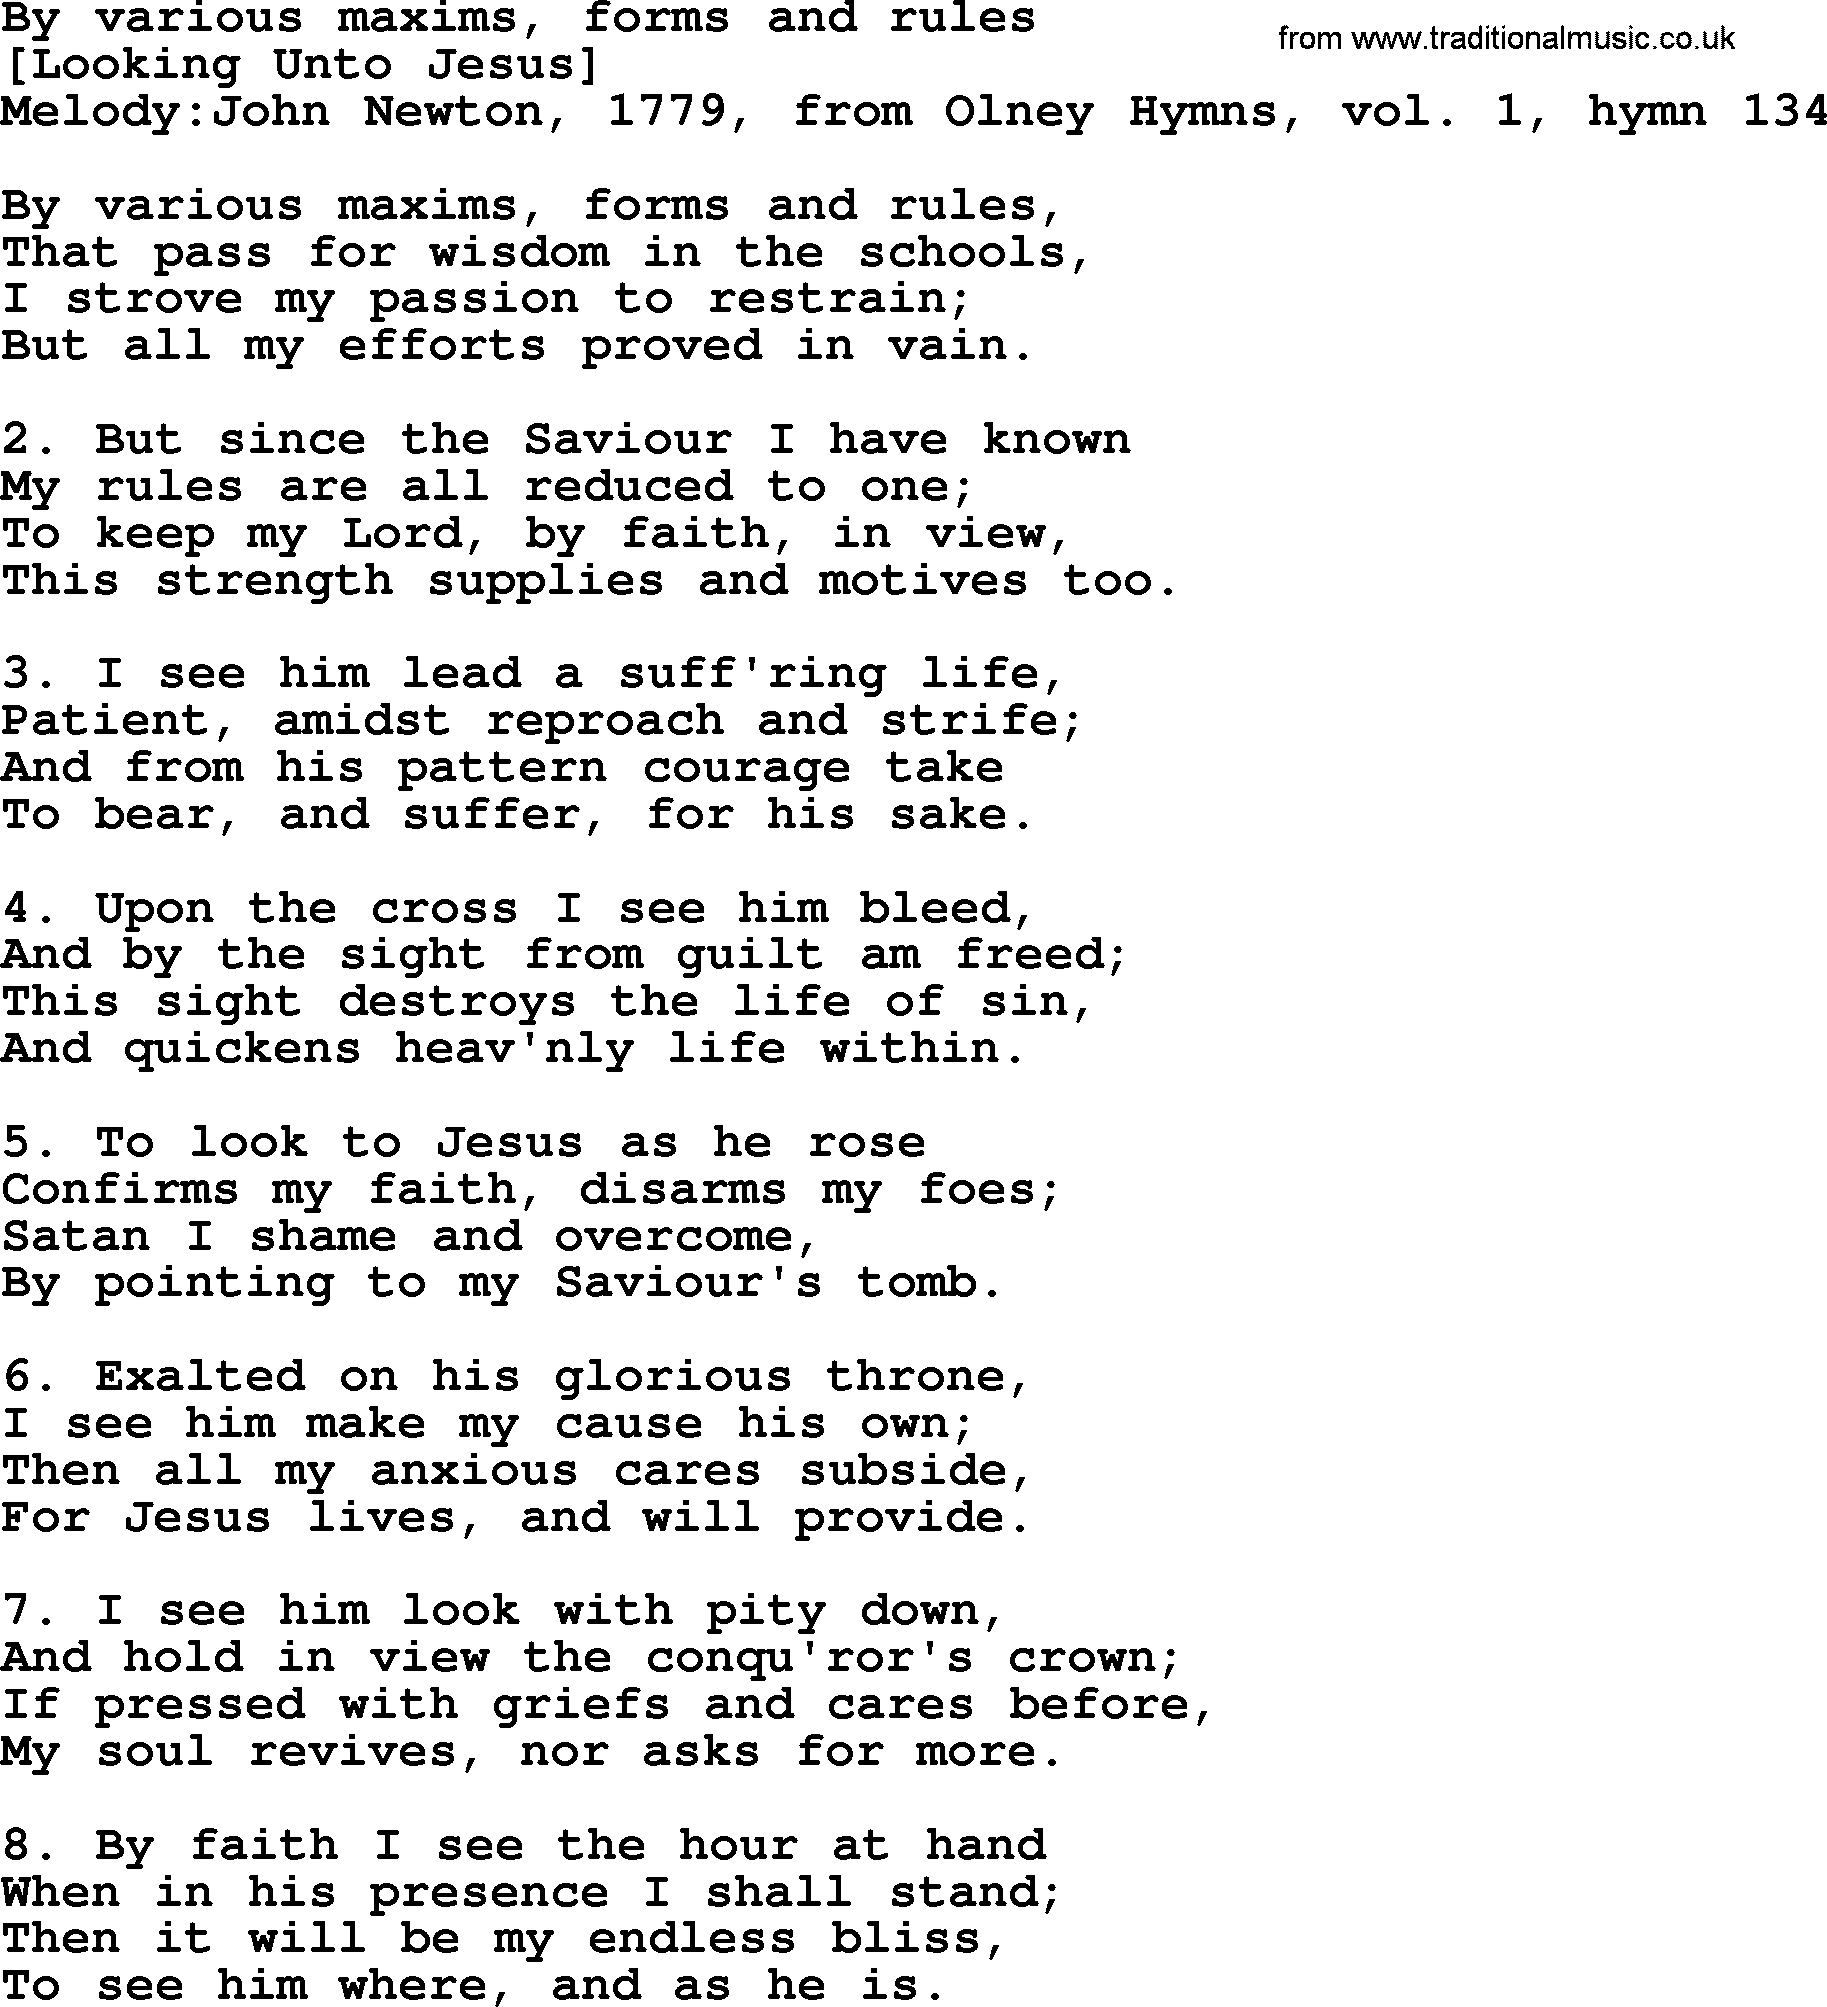 Old English Song: By Various Maxims, Forms And Rules lyrics